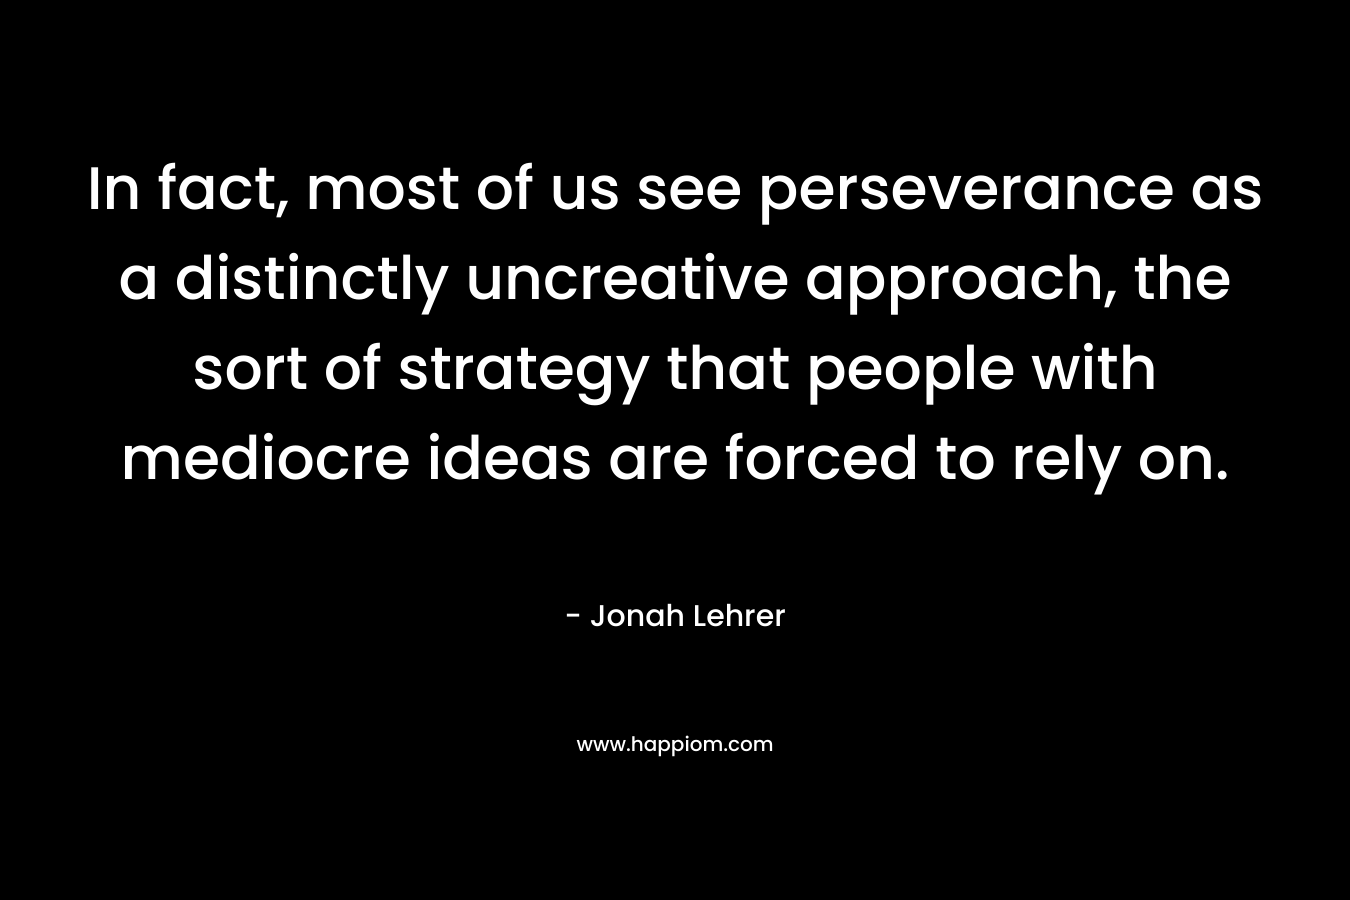 In fact, most of us see perseverance as a distinctly uncreative approach, the sort of strategy that people with mediocre ideas are forced to rely on.